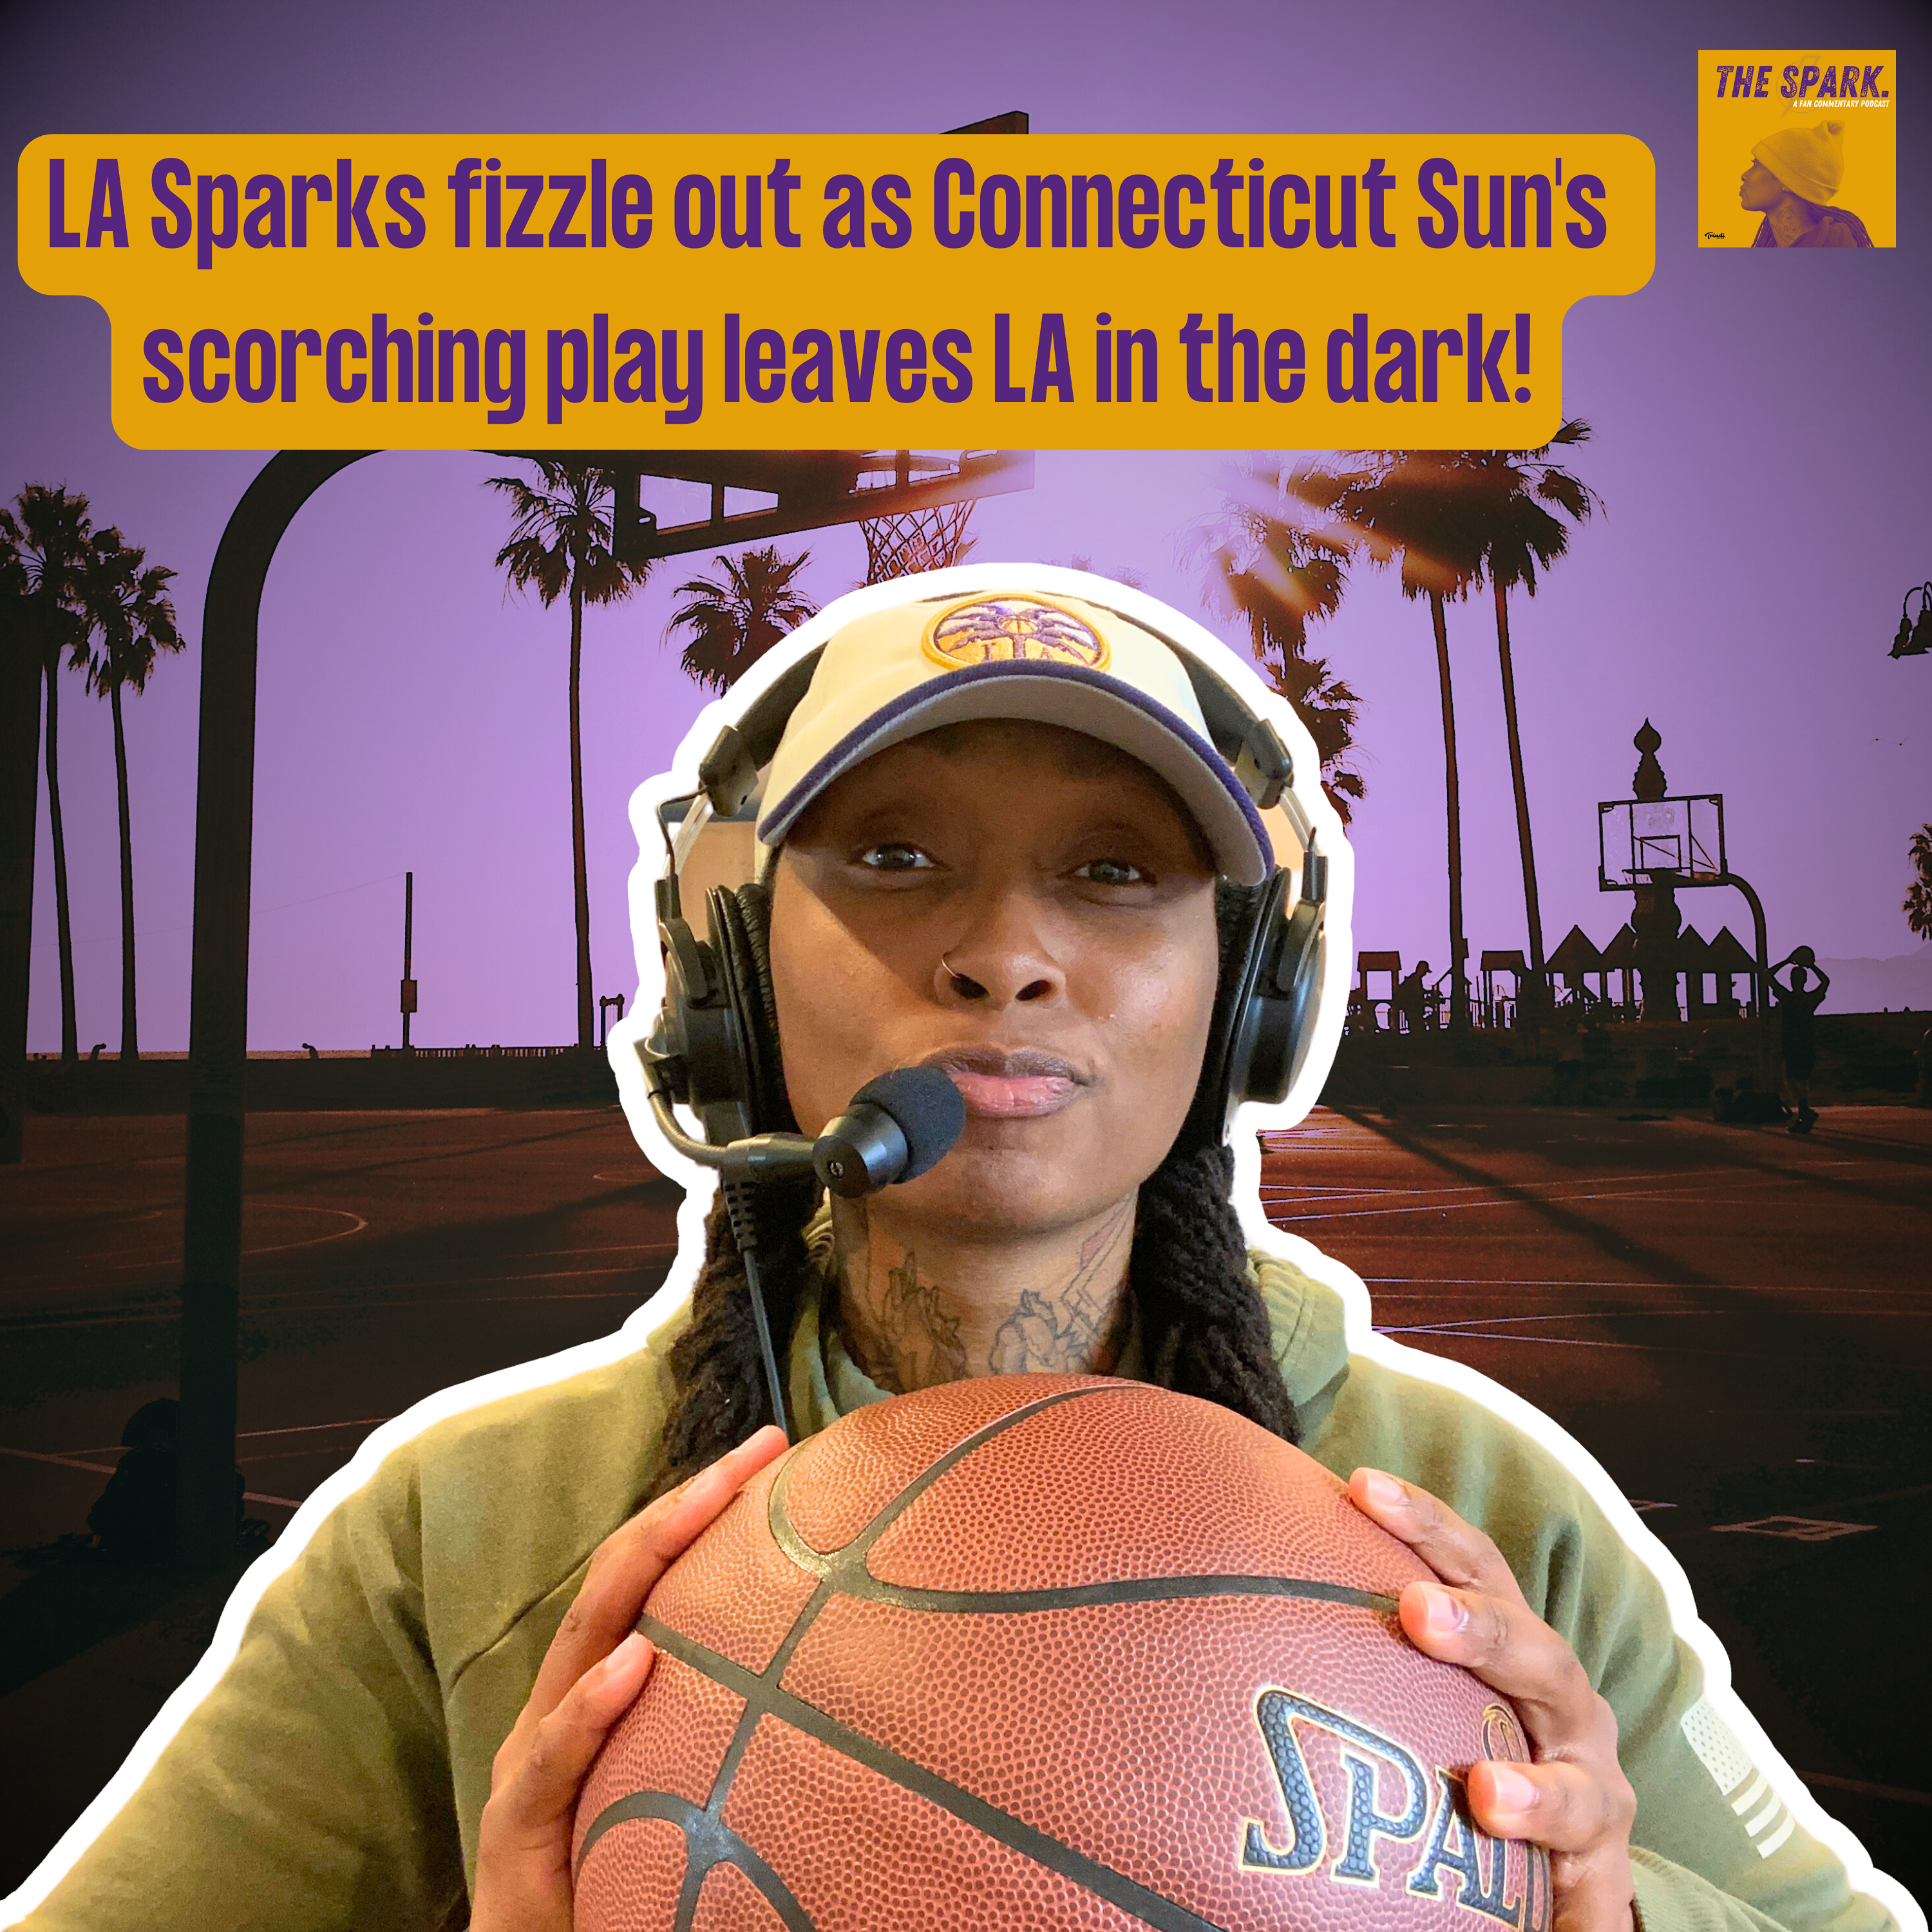 LA Sparks fizzle out as Connecticut Sun's scorching play leaves LA in the dark!